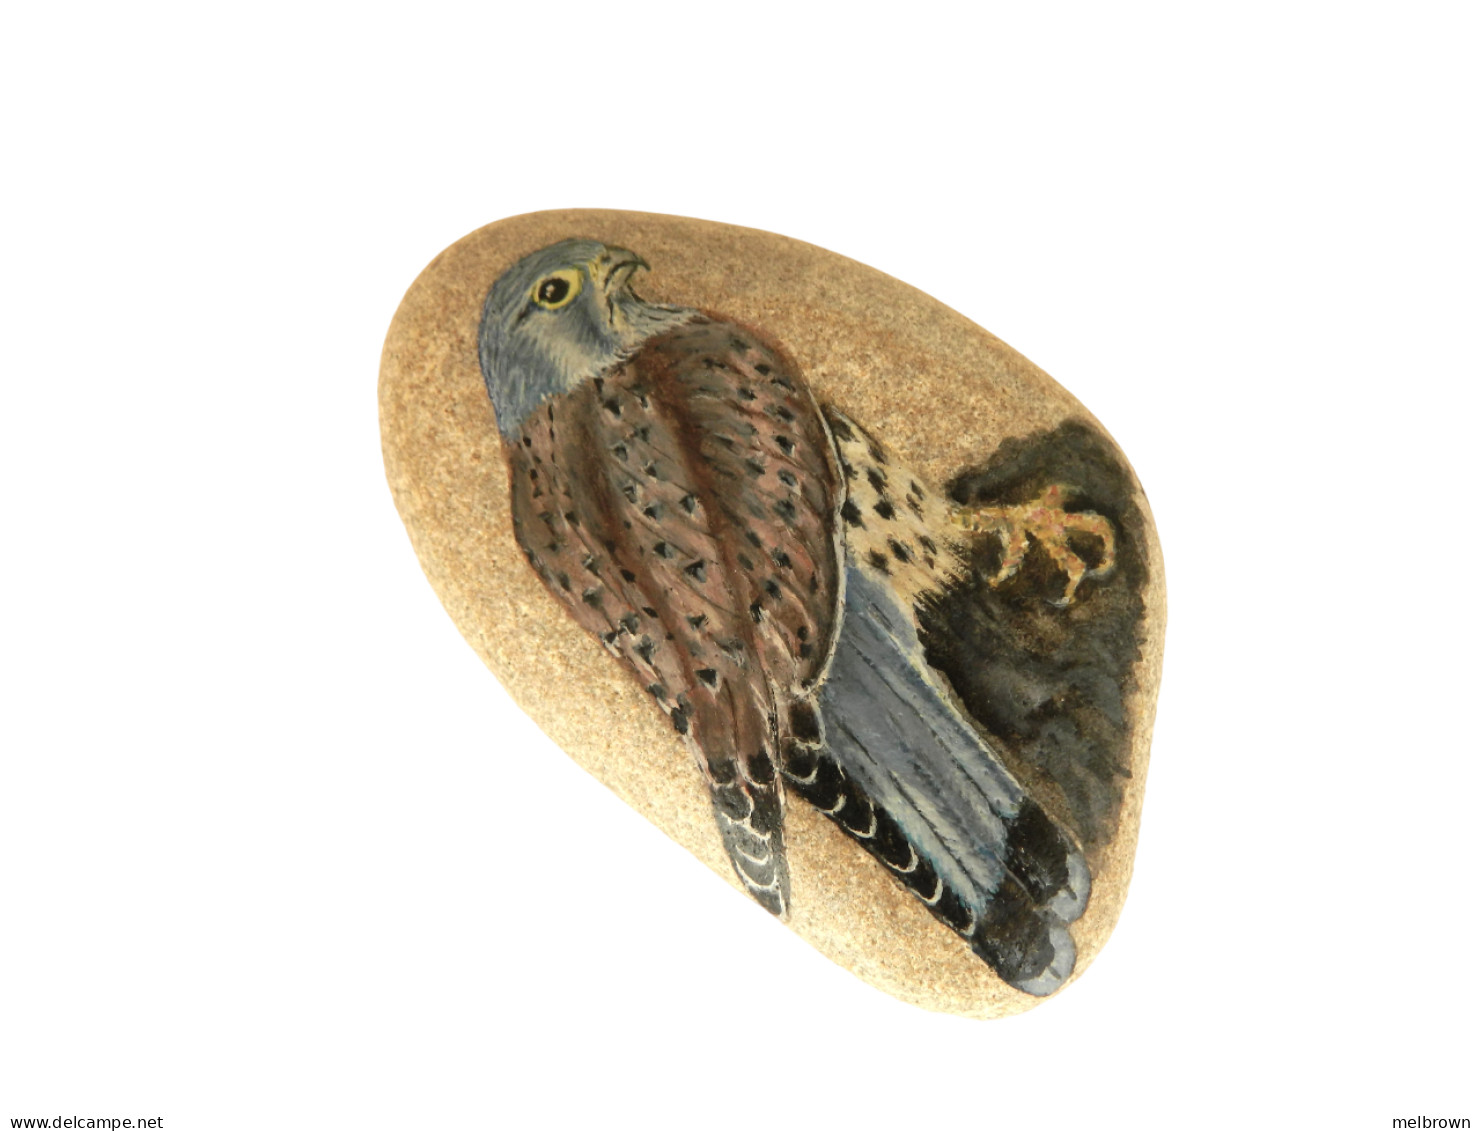 KESTREL BIRD Hand Painted On A Smooth Beach Stone Paperweight Decoration - Paper-weights